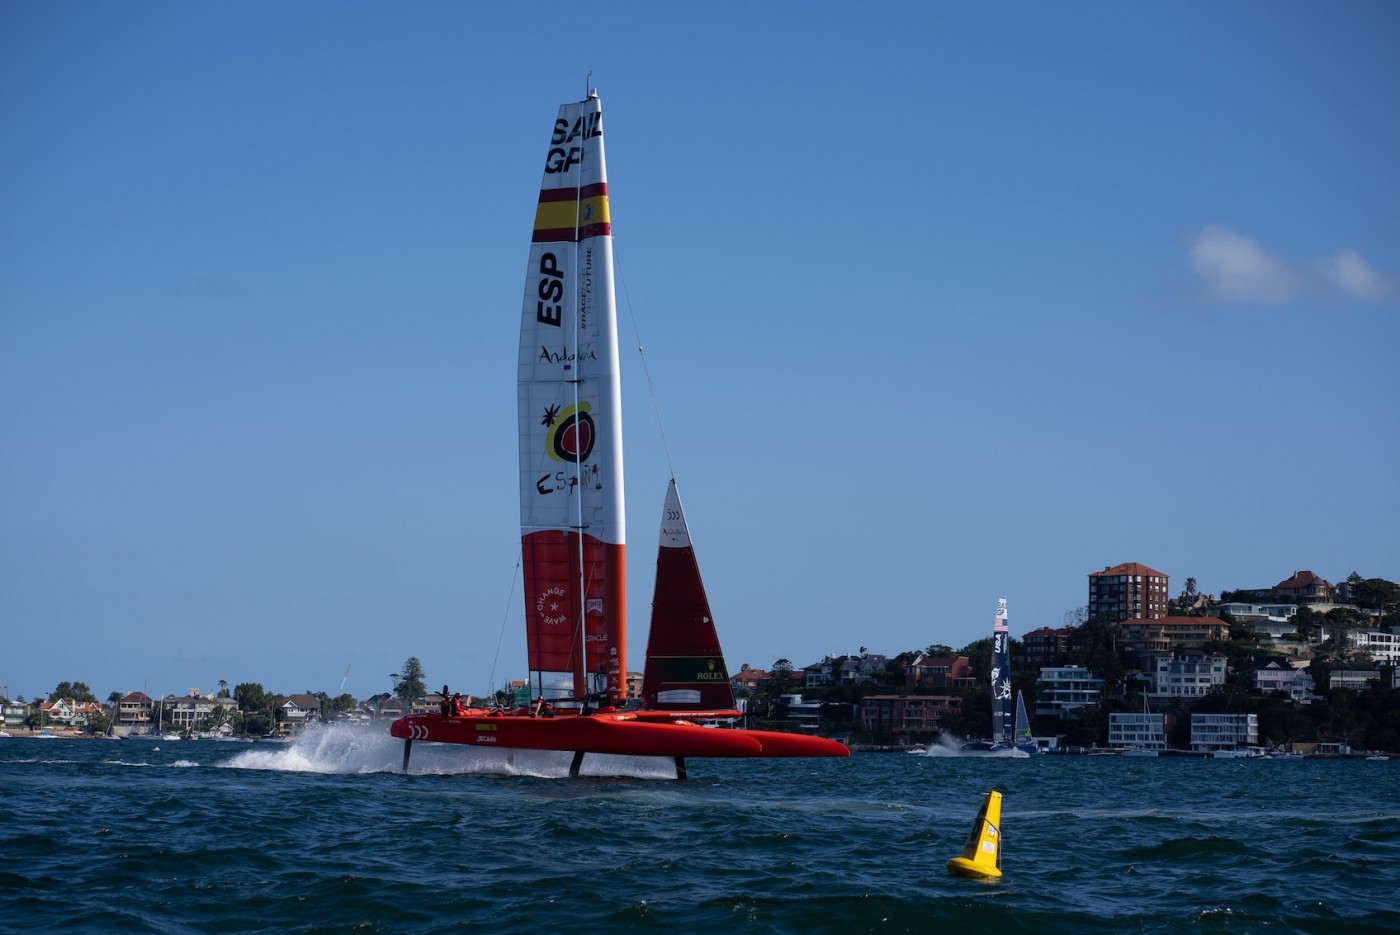 SailGP appoints Strive to broaden its esports and gaming thinking after eSail GP success  – Case Study